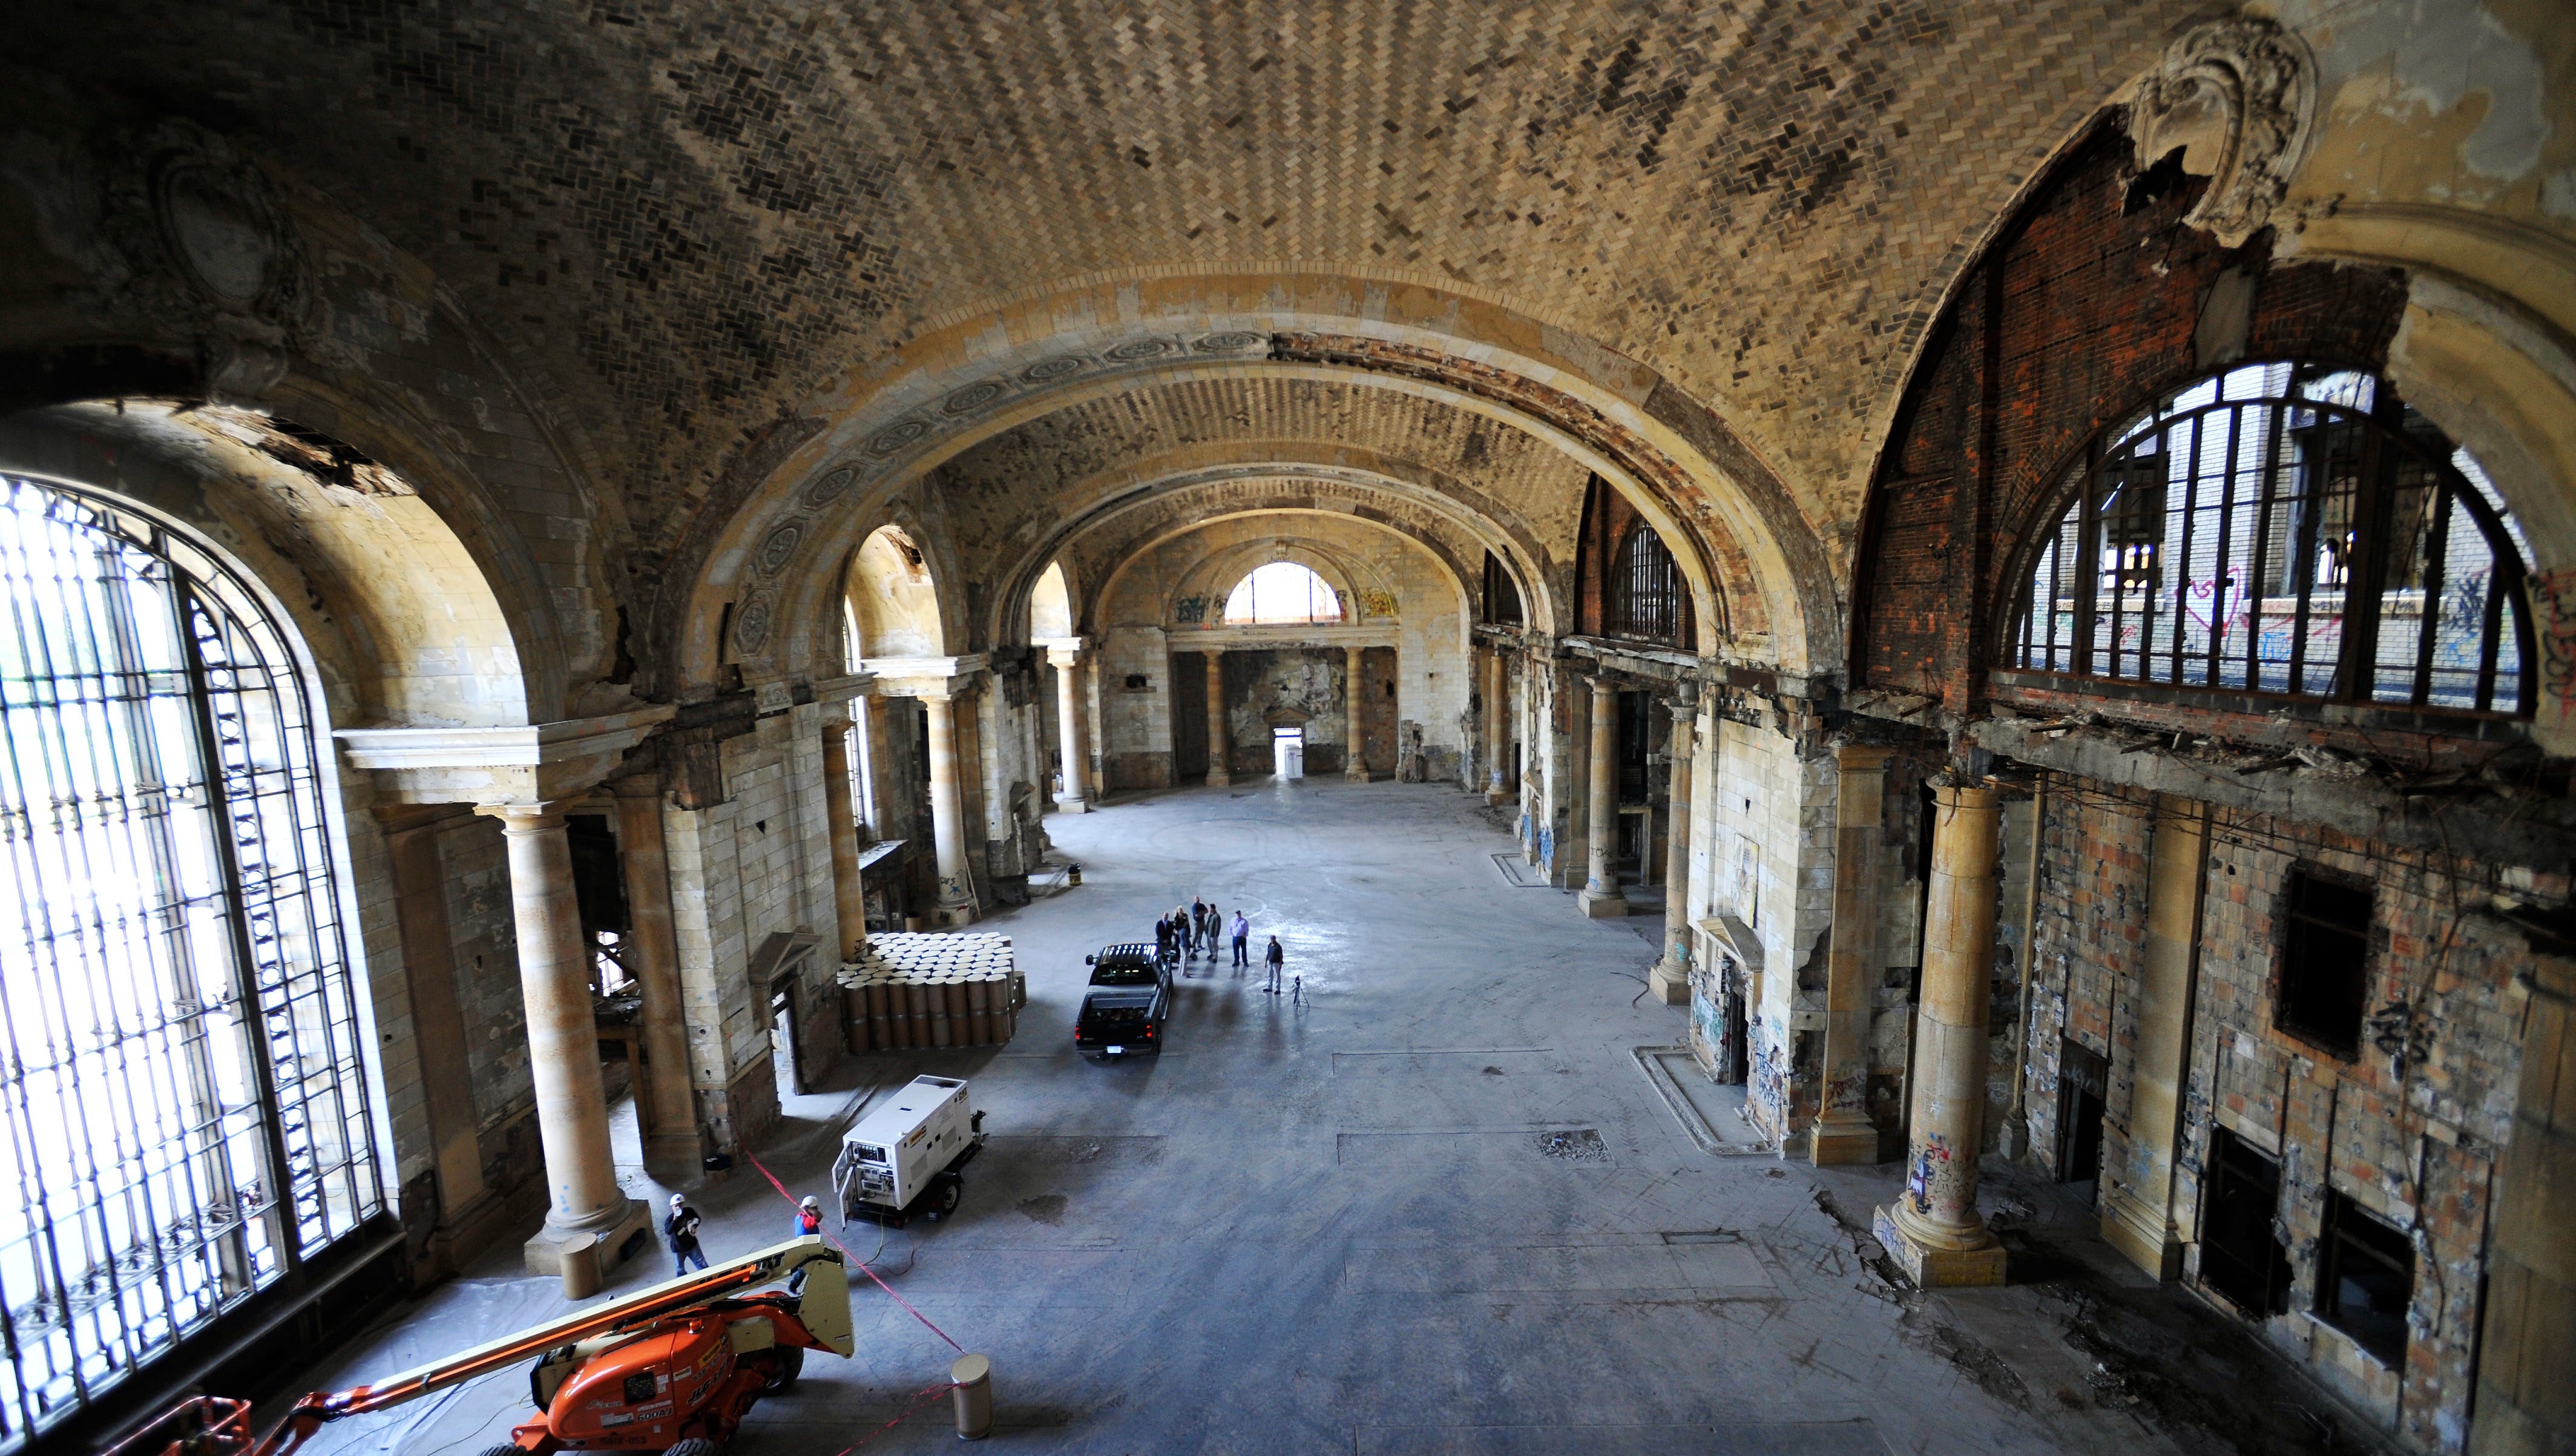 This is a view of the grand mezzanine inside the Michigan Central Depot, which was built for $15 million and designed by the same architects who designed Grand Central Station in New York City.